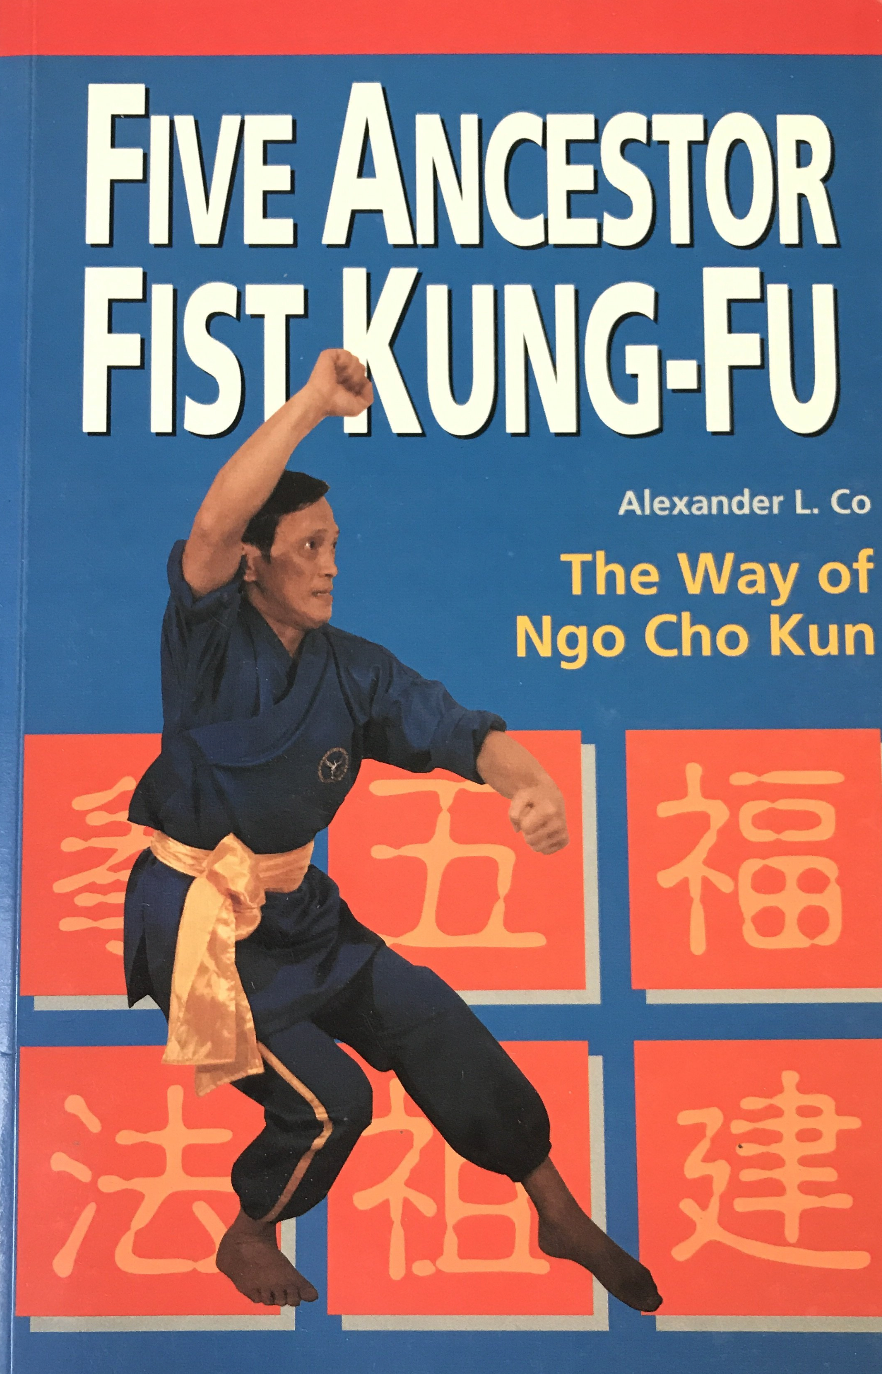 Five Ancestor Fist Kung Fu: The Way of Ngo Cho Kun Book by Alexander Co (Preowned) - Budovideos Inc